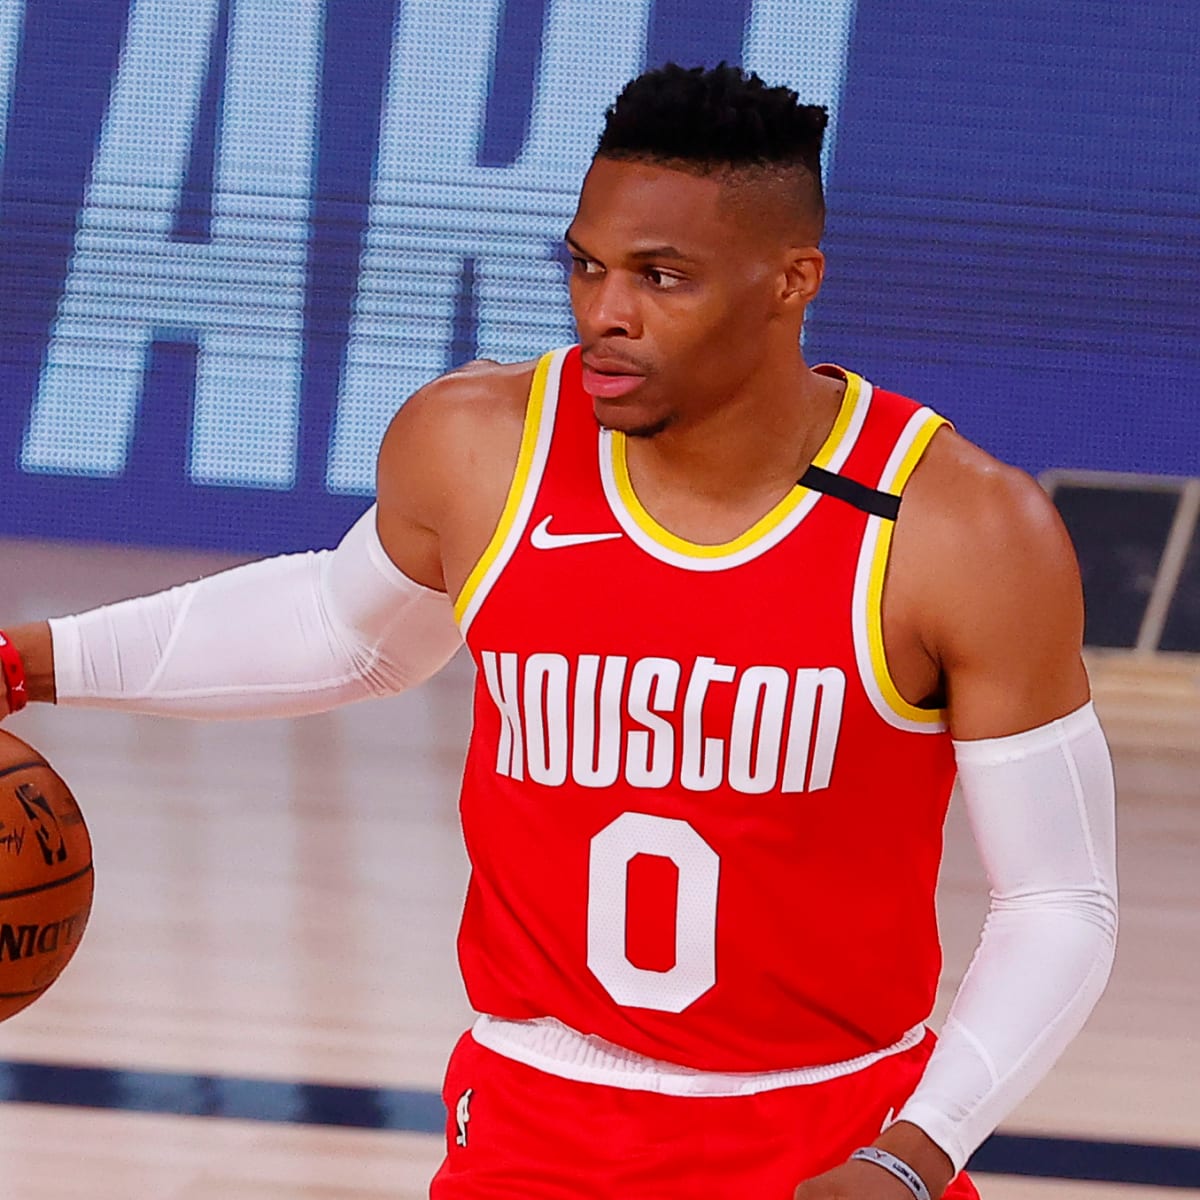 Chris Paul Out, Russell Westbrook In As Rockets Pull Trigger On